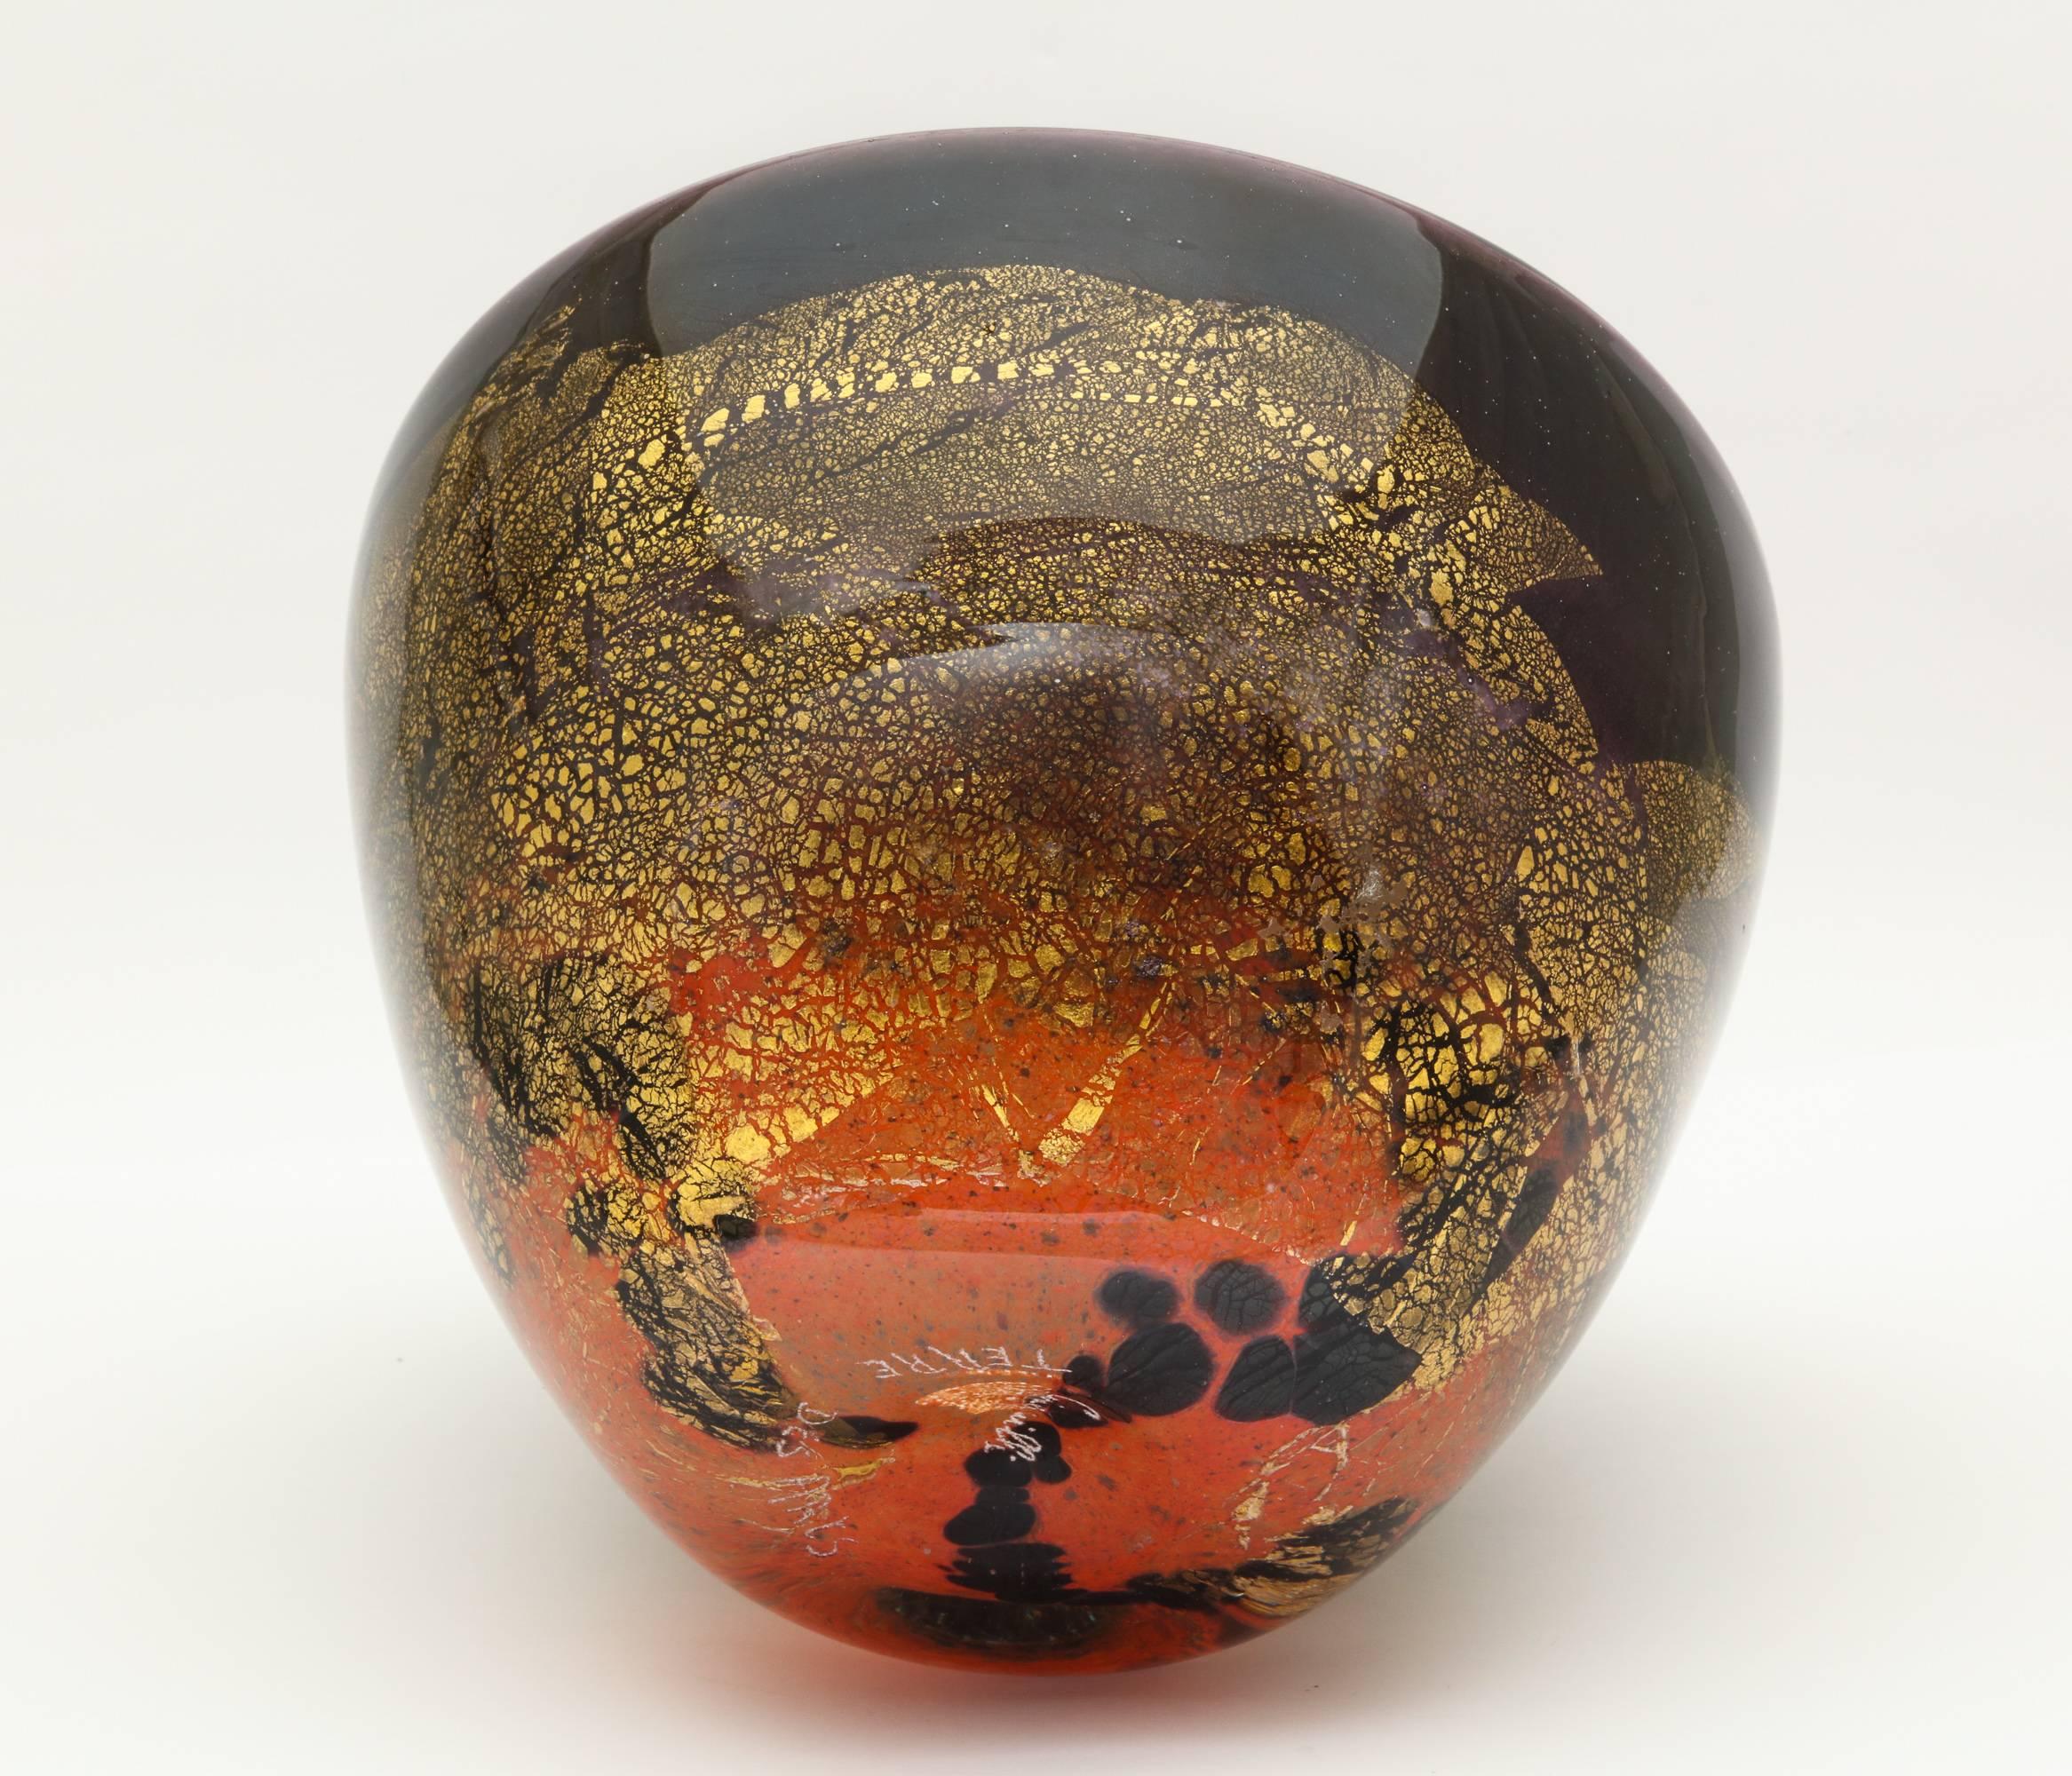 Volcanic Red and Black Terre Des Arts Handblown Glass Bowl In Excellent Condition For Sale In New York, NY